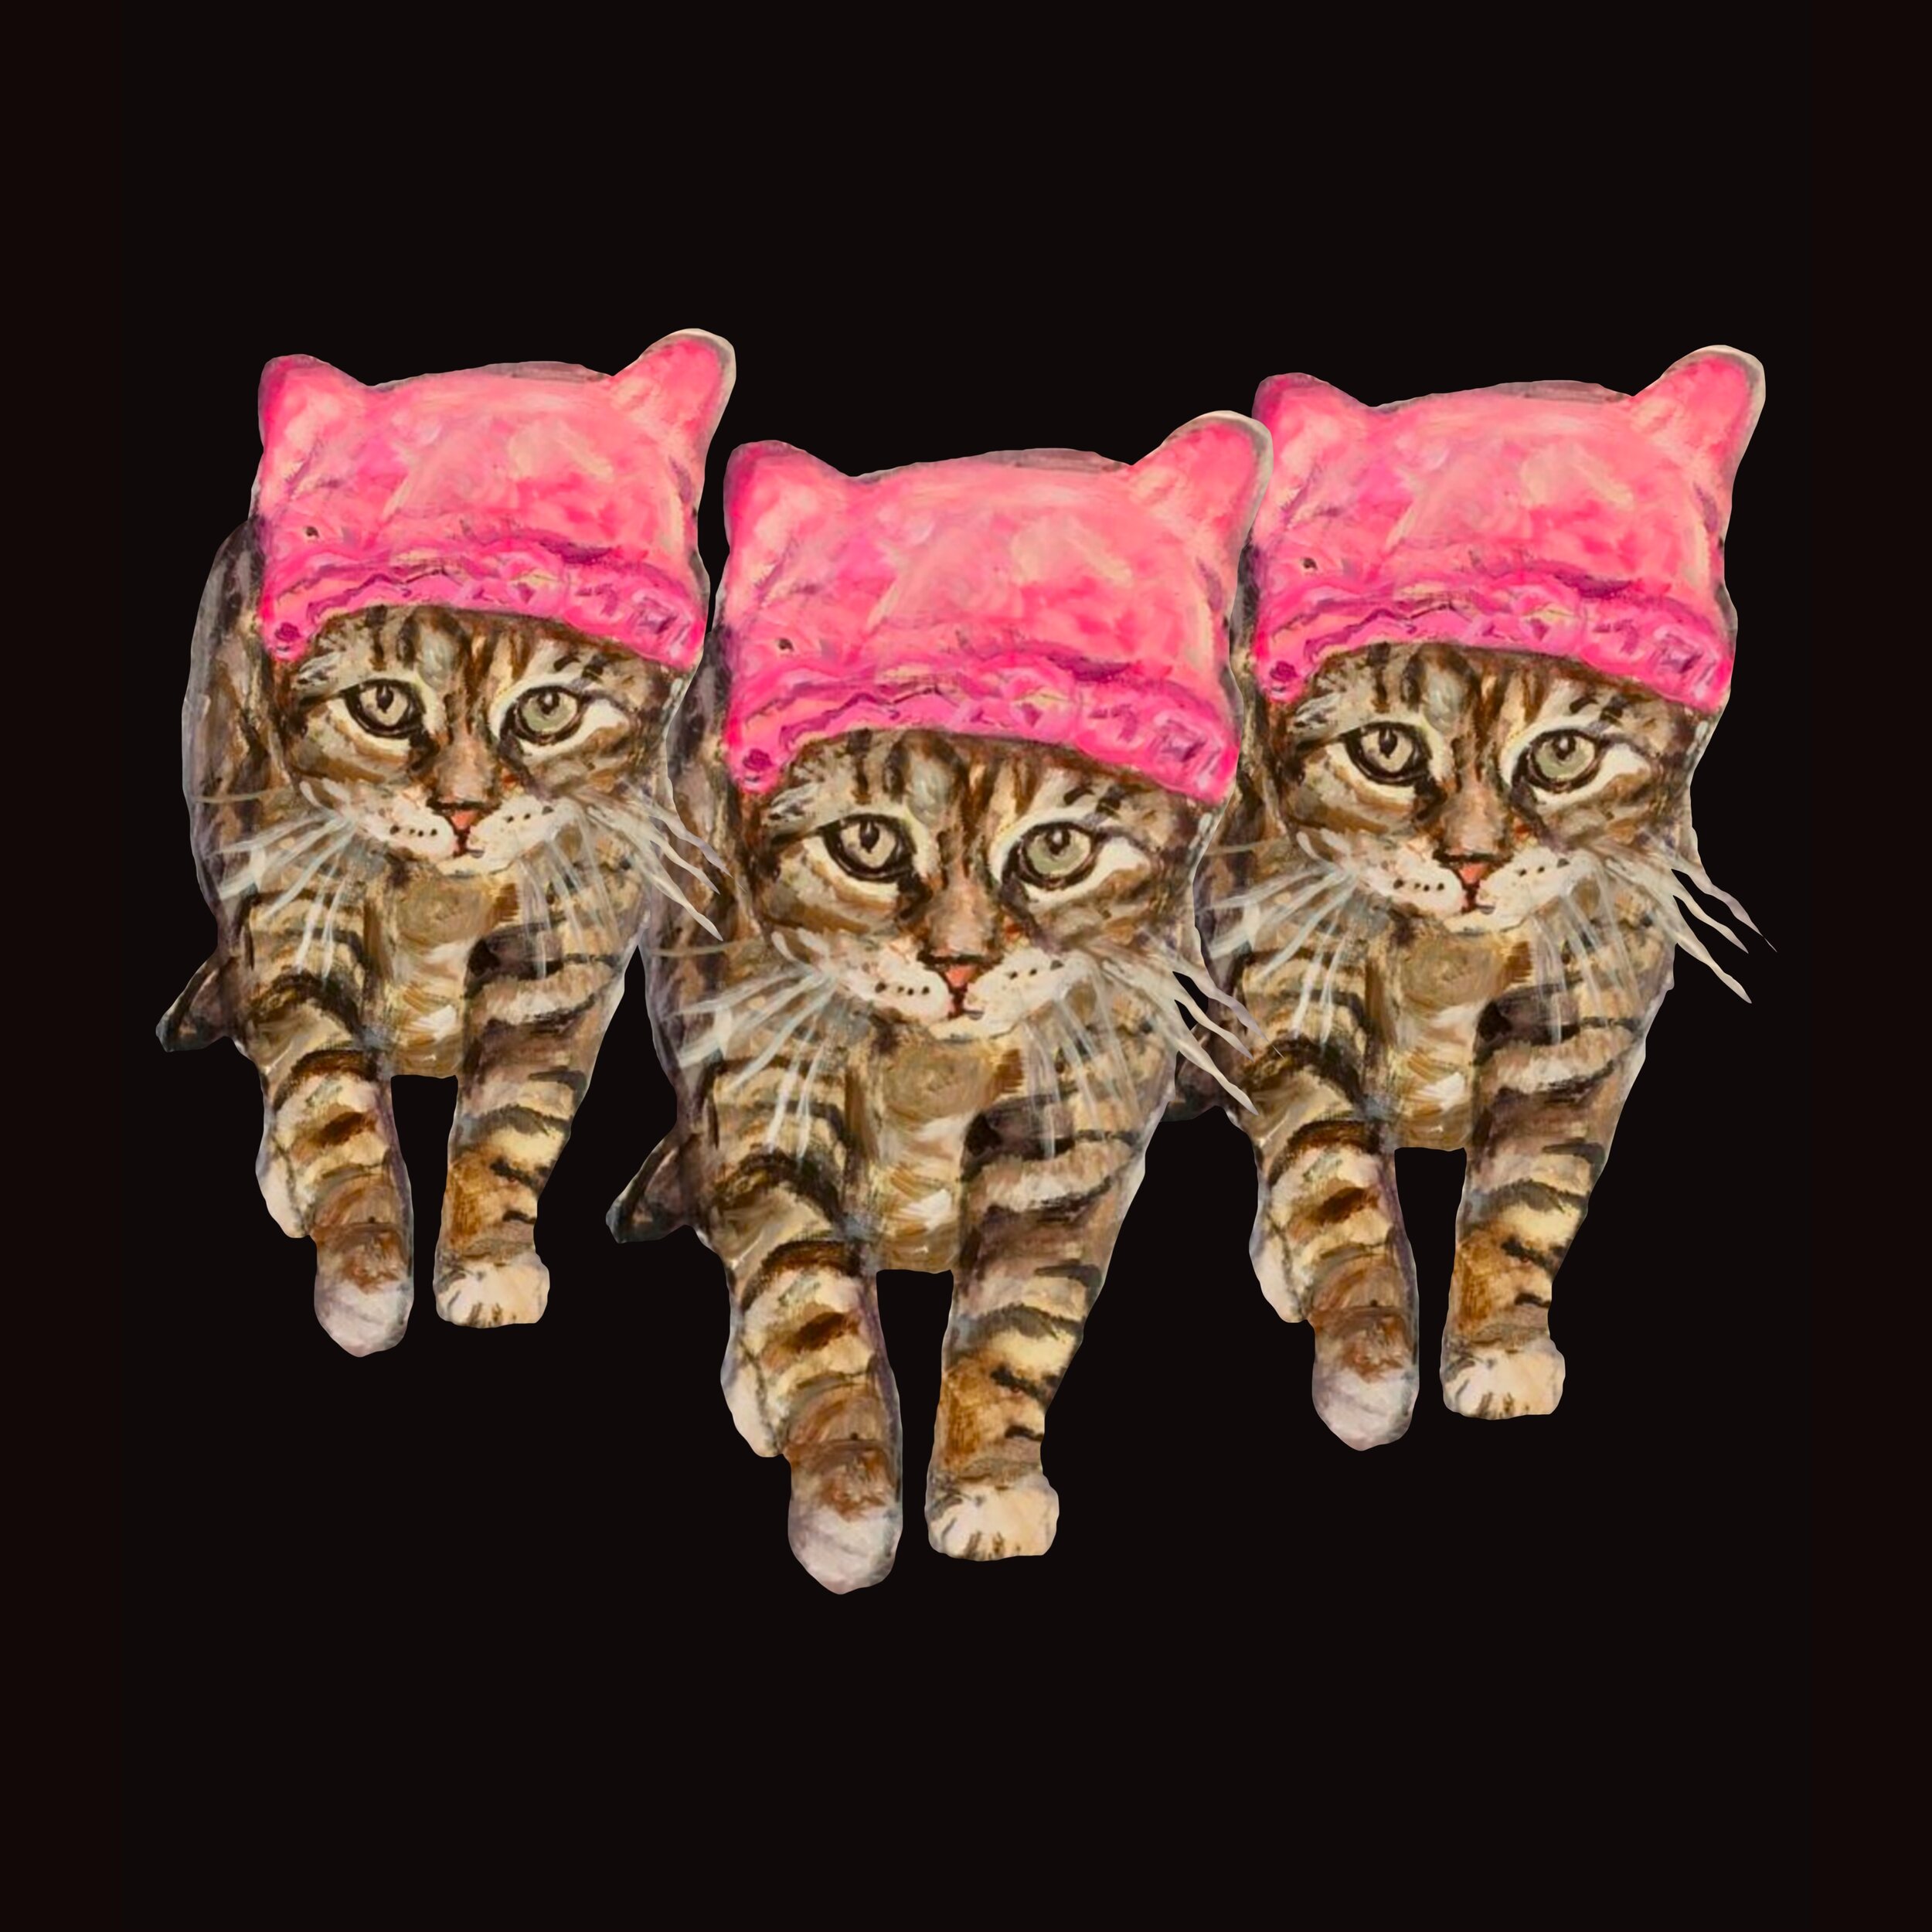  The Revolution is Feline, 2020, 12 x 12 inches, Giclée print stretched on canvas, Artist proof,  $300 3 cats marching with pink hats 